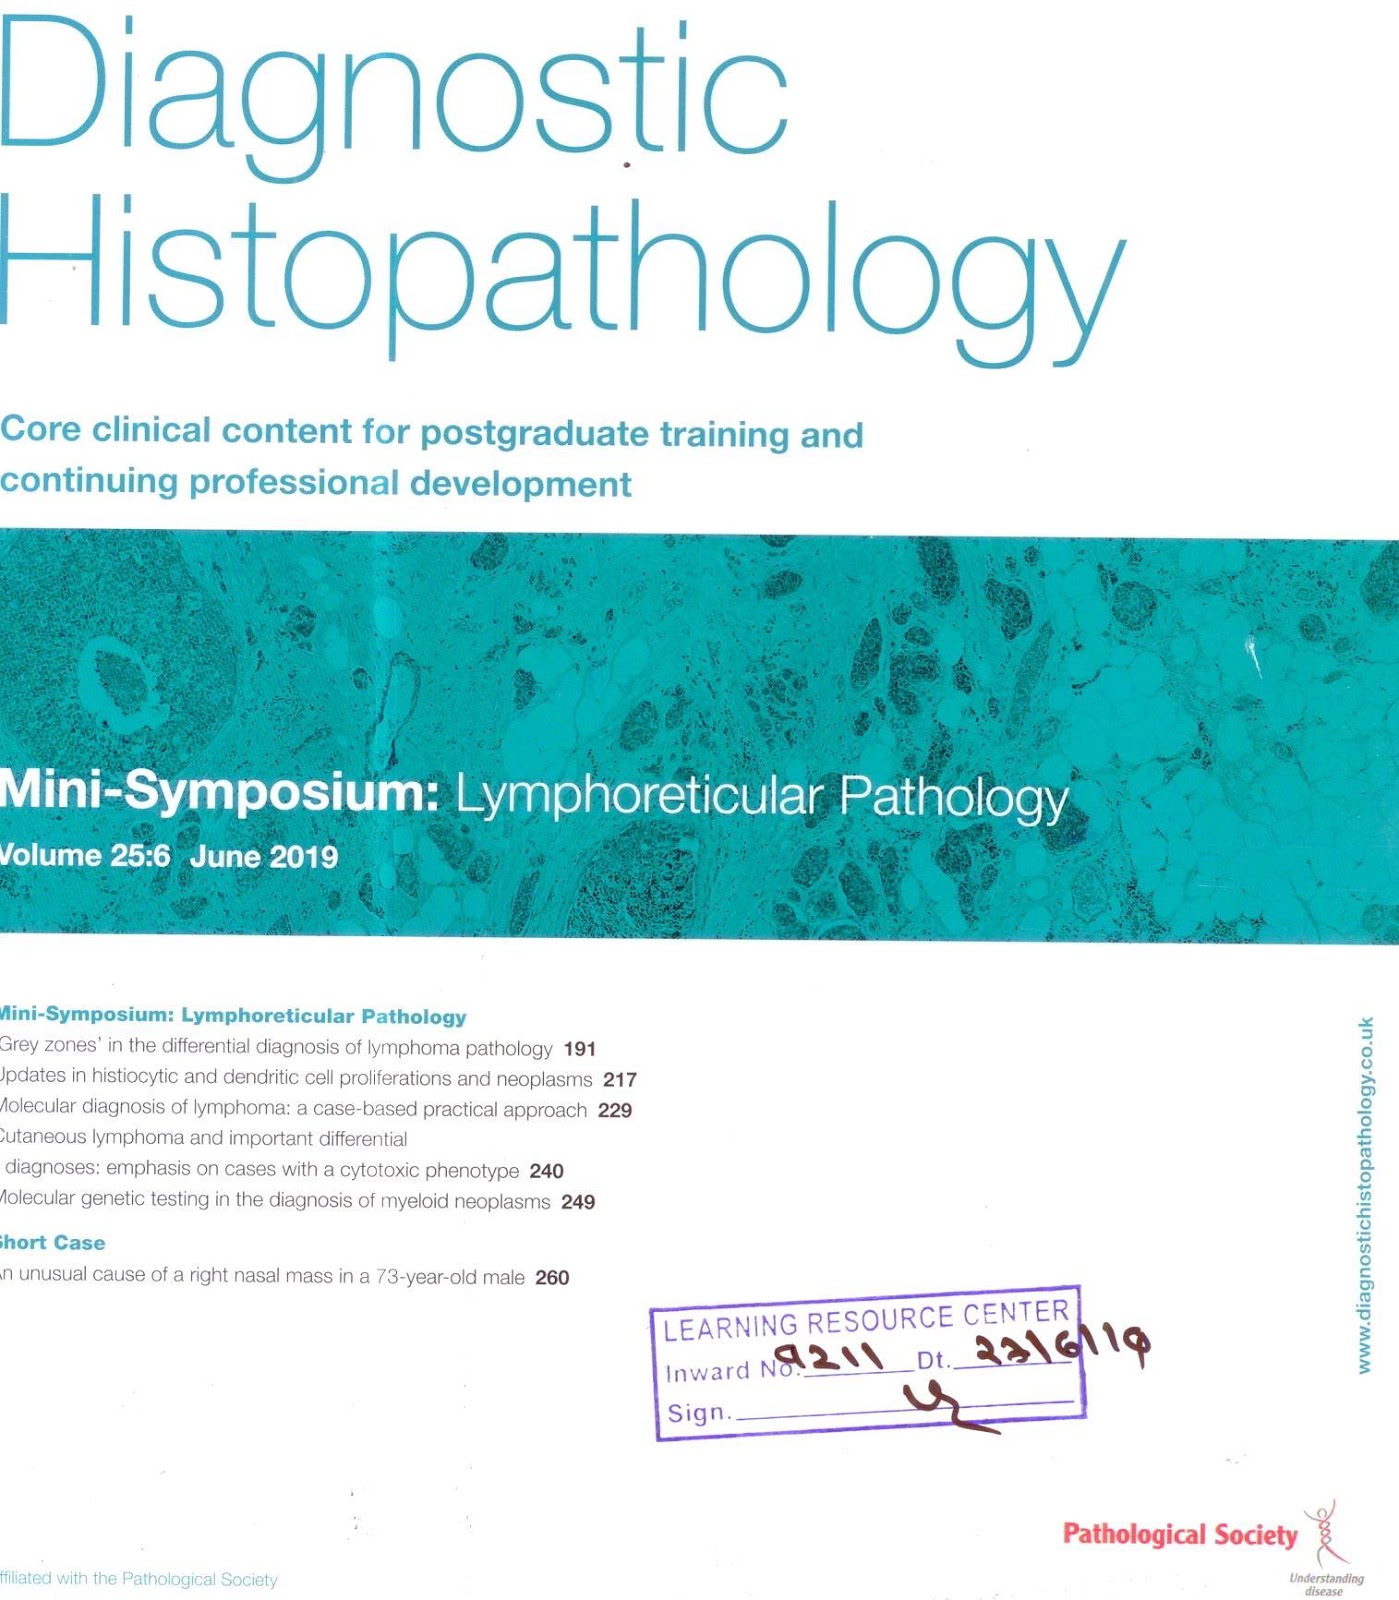 https://www.sciencedirect.com/journal/diagnostic-histopathology/vol/25/issue/6